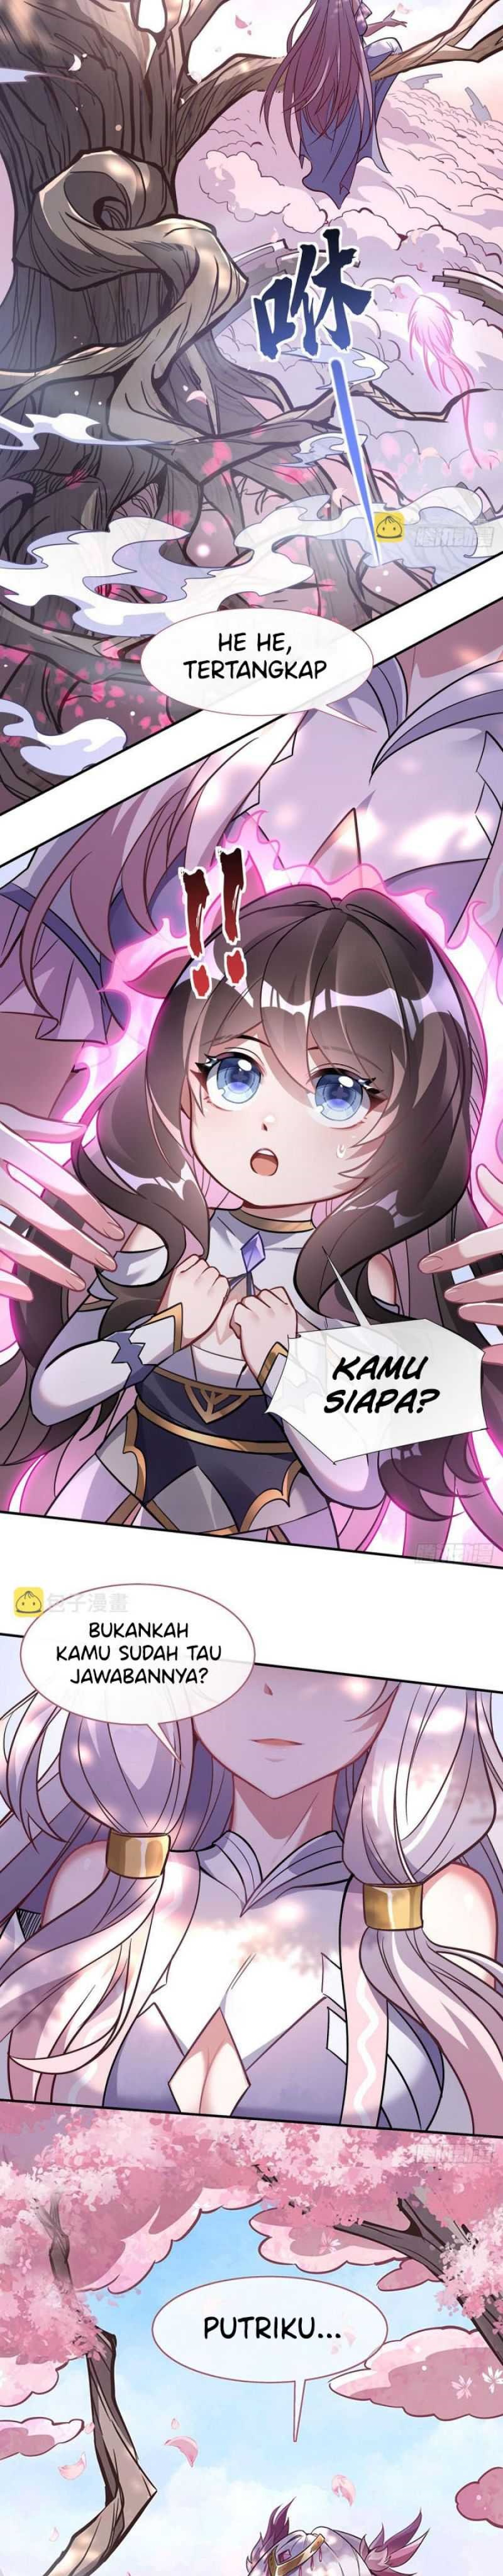 Dilarang COPAS - situs resmi www.mangacanblog.com - Komik my female apprentices are all big shots from the future 111 - chapter 111 112 Indonesia my female apprentices are all big shots from the future 111 - chapter 111 Terbaru 19|Baca Manga Komik Indonesia|Mangacan